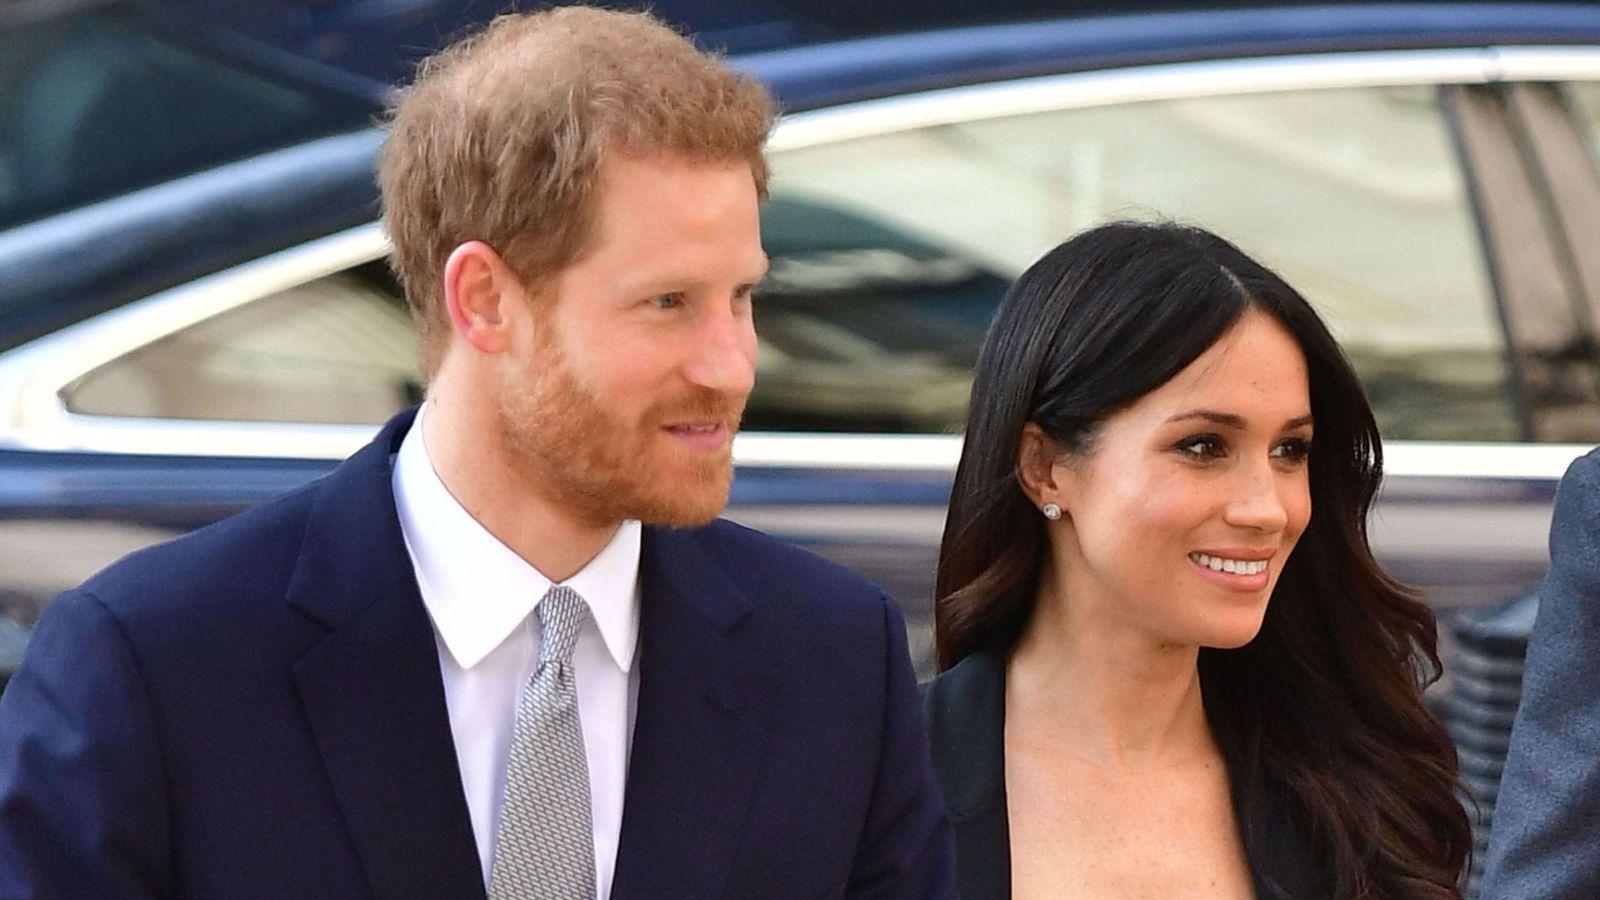 Queen makes Prince Harry Duke of Sussex